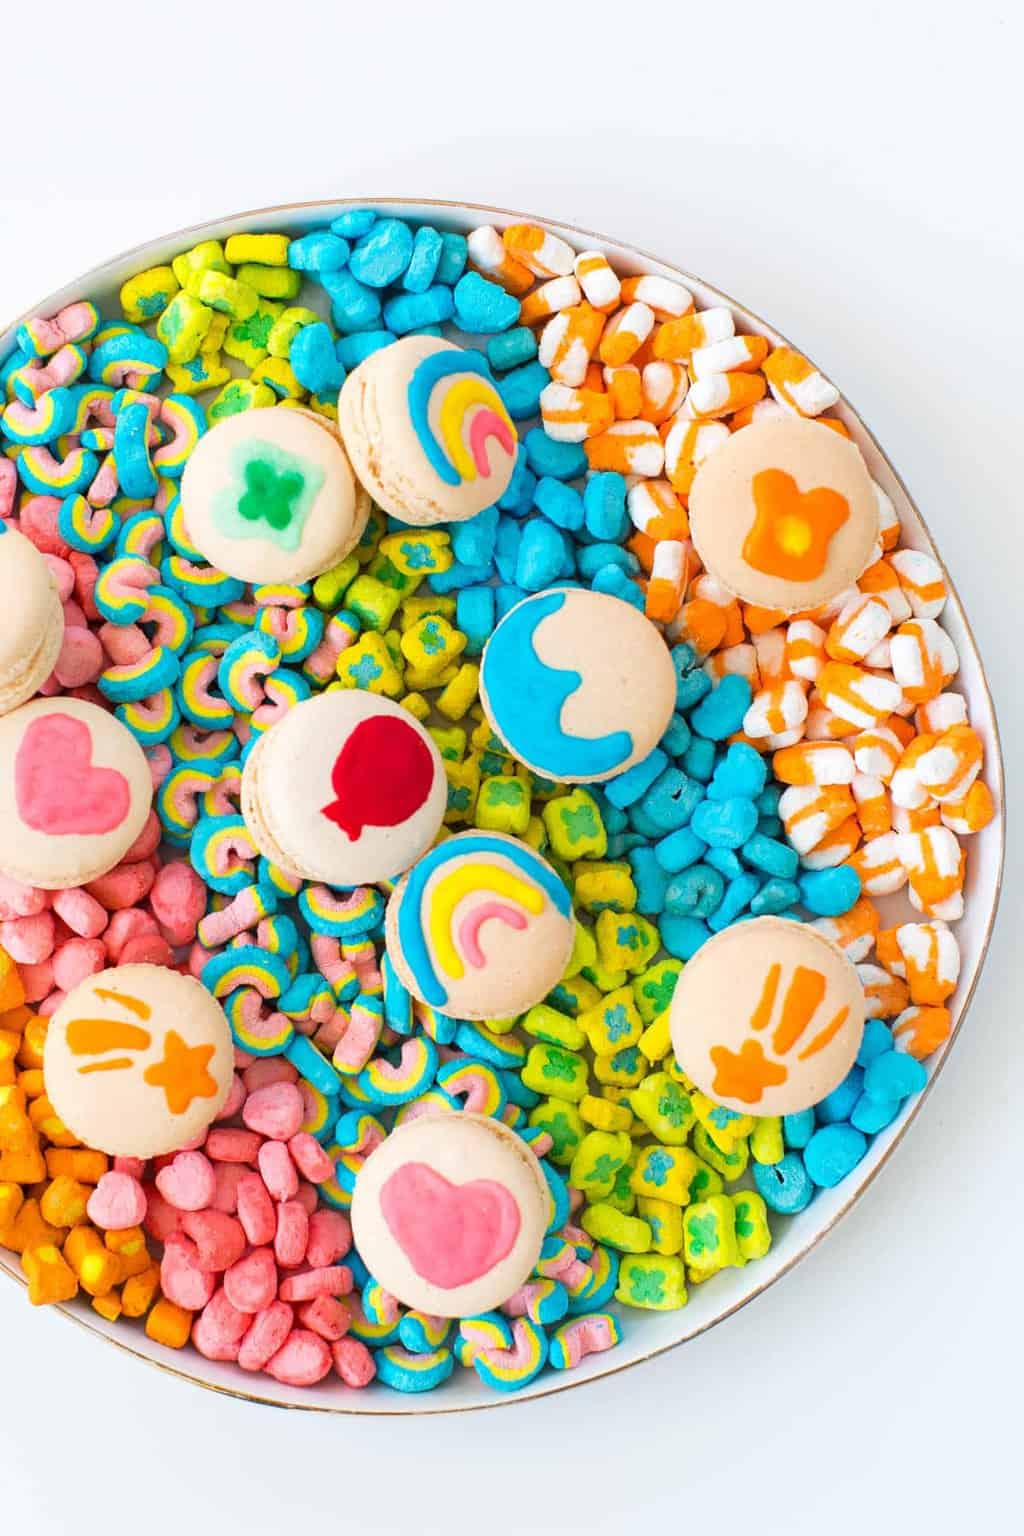 DIY lucky charms macarons by top Houston lifestyle blogger, Ashley Rose of Sugar and Cloth